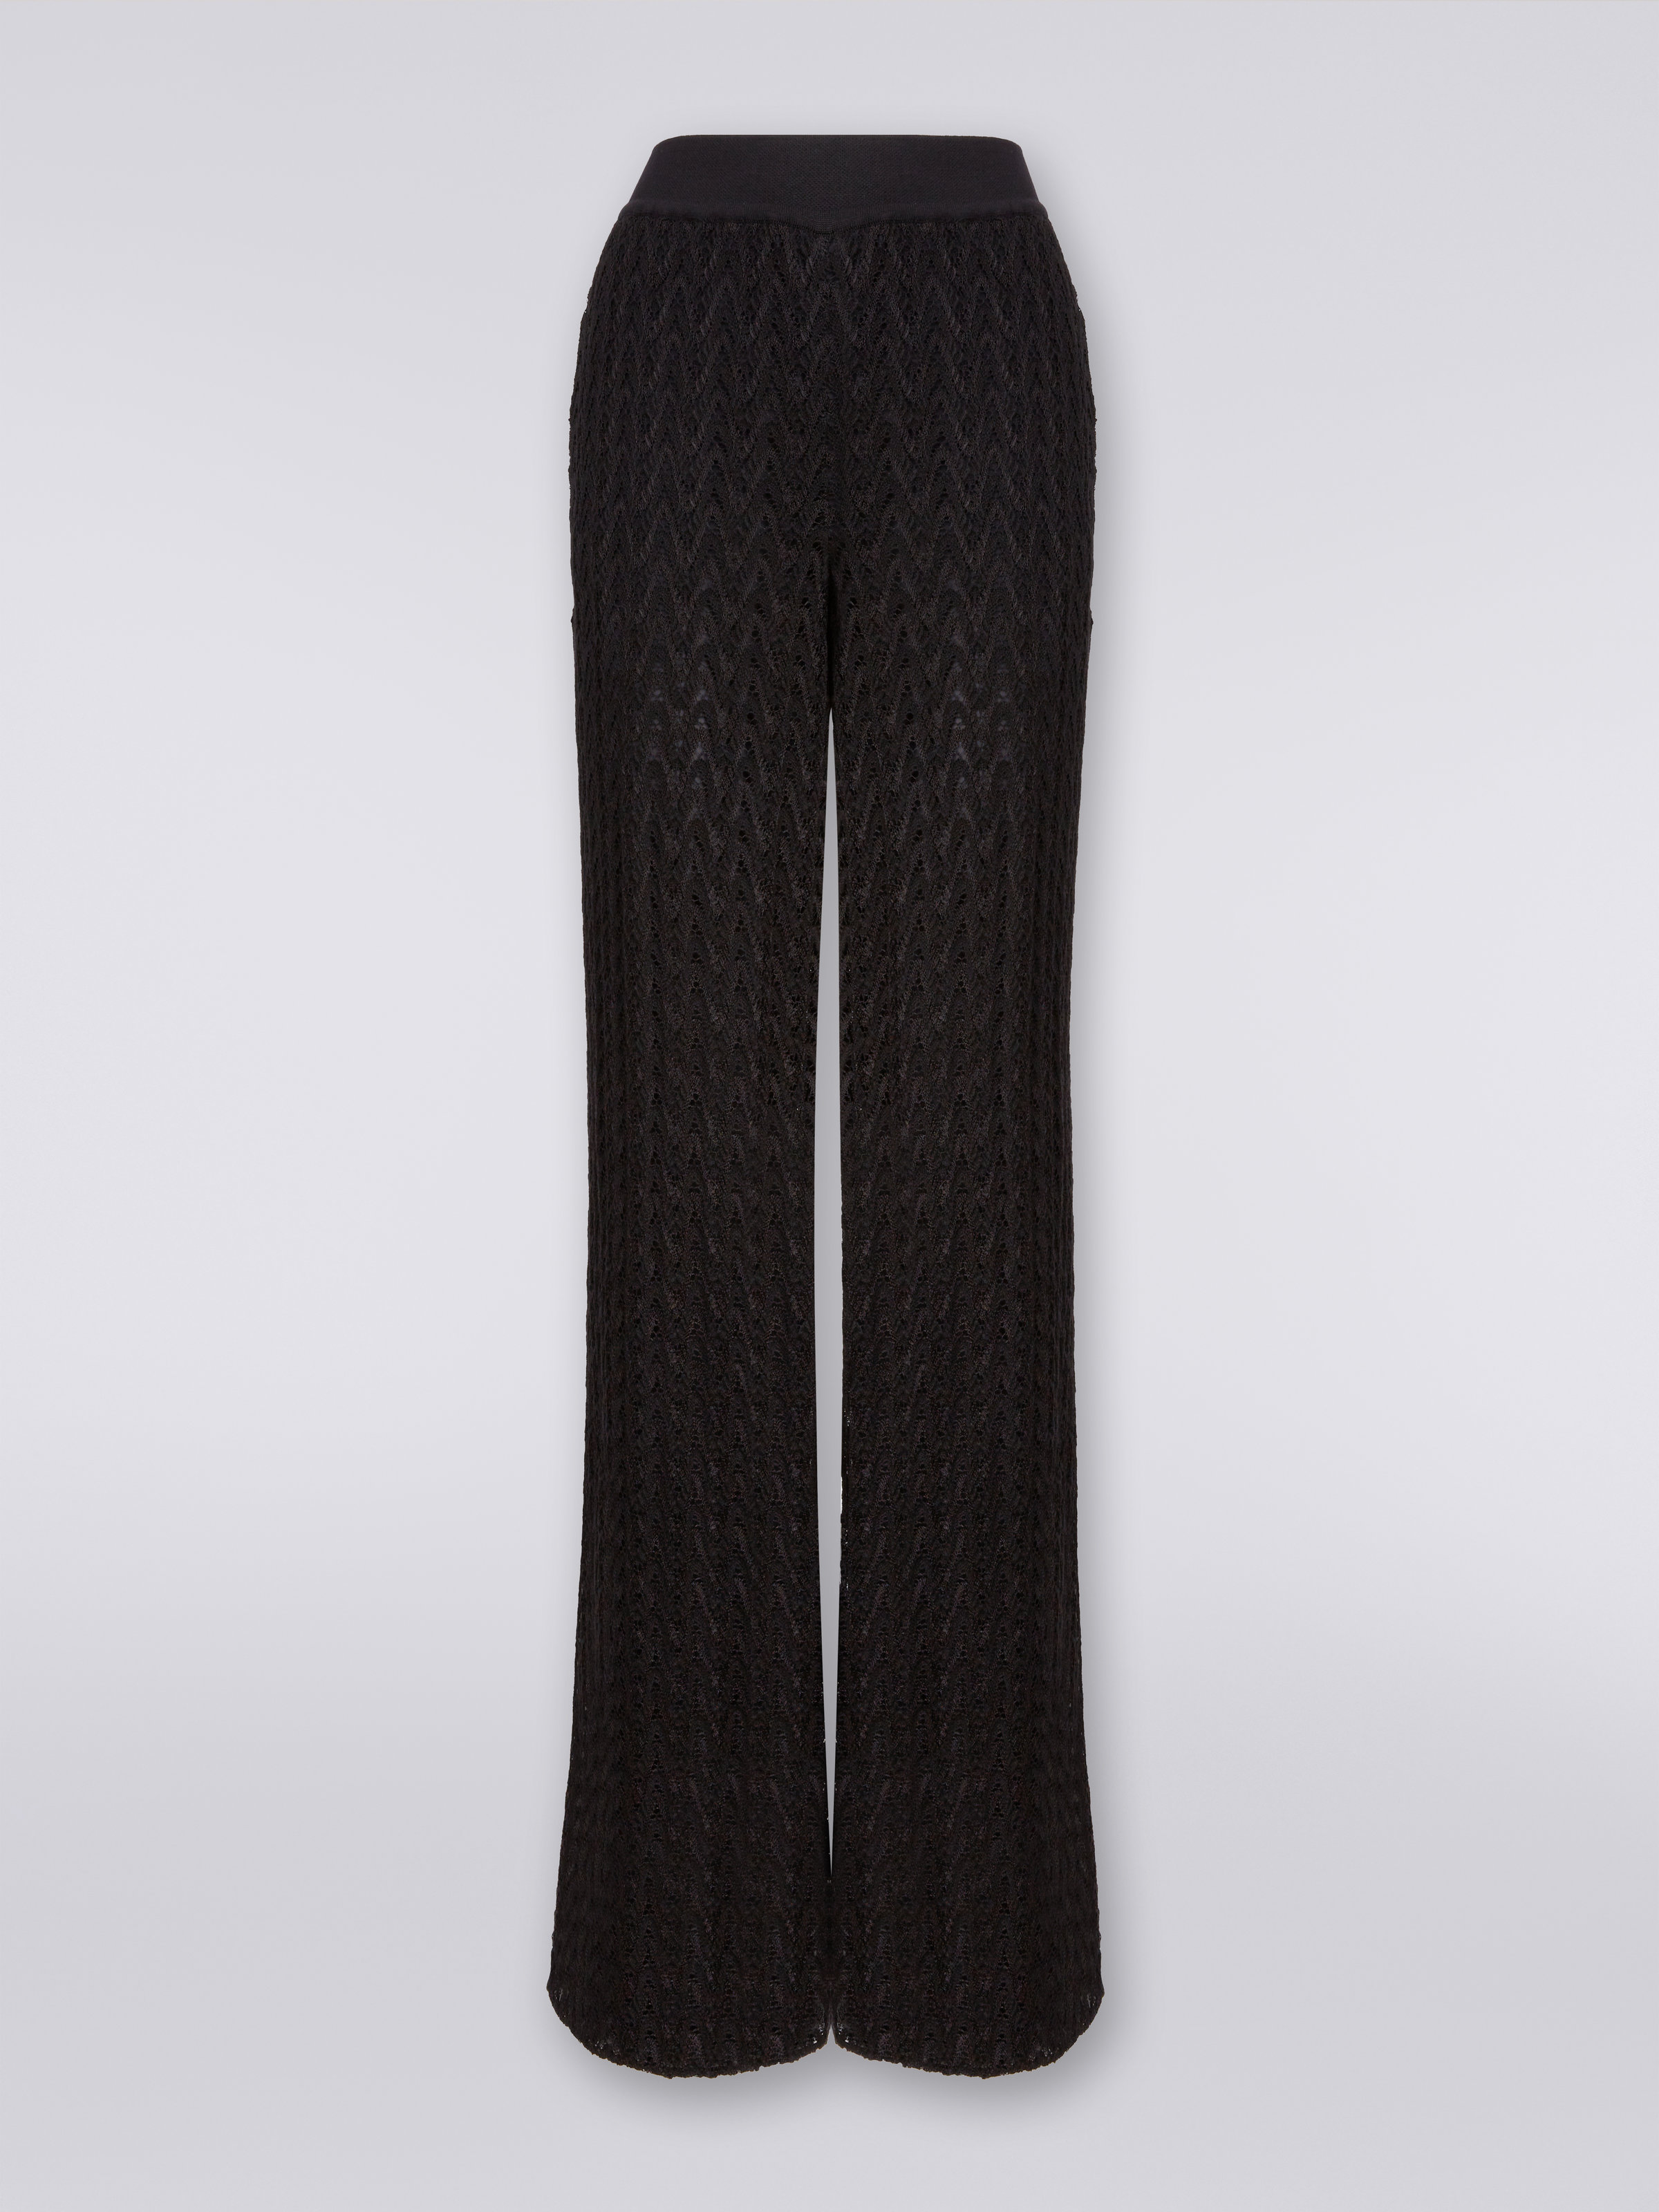 Palazzo pants in raschel knit wool and viscose, Black    - 0